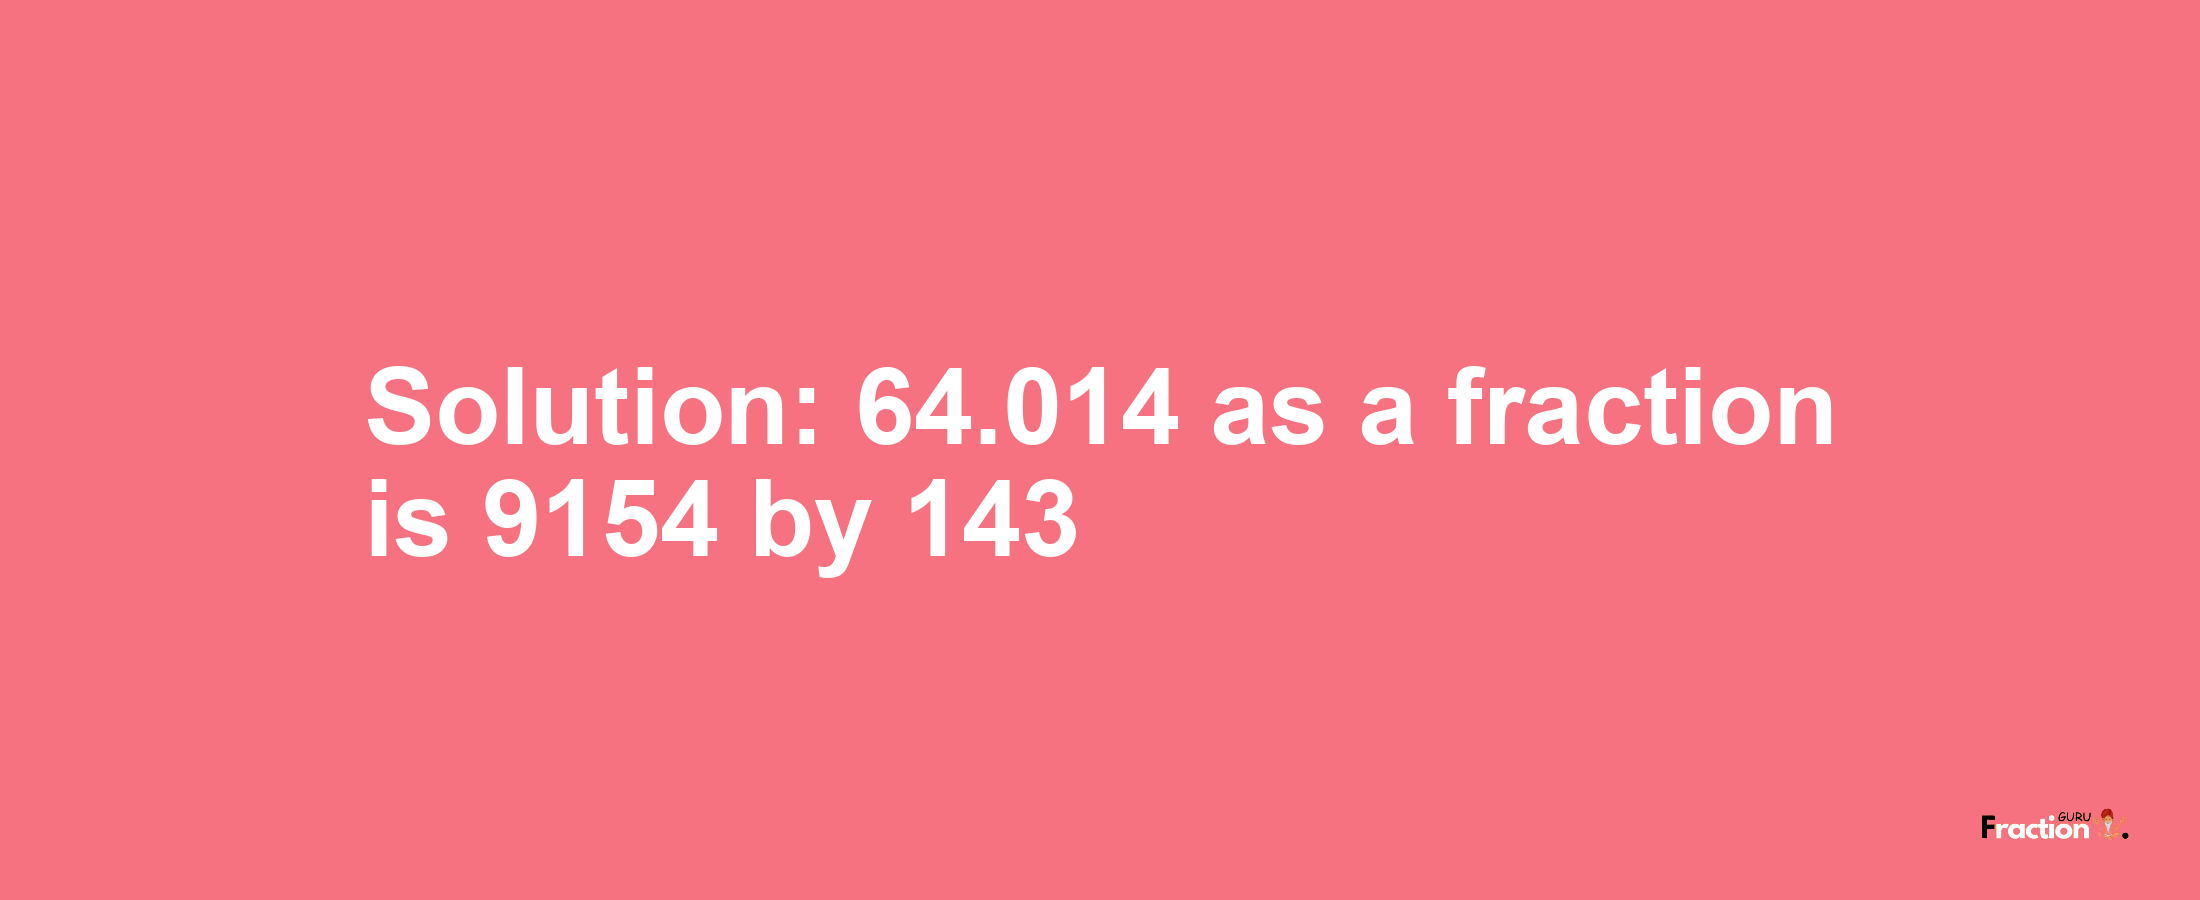 Solution:64.014 as a fraction is 9154/143